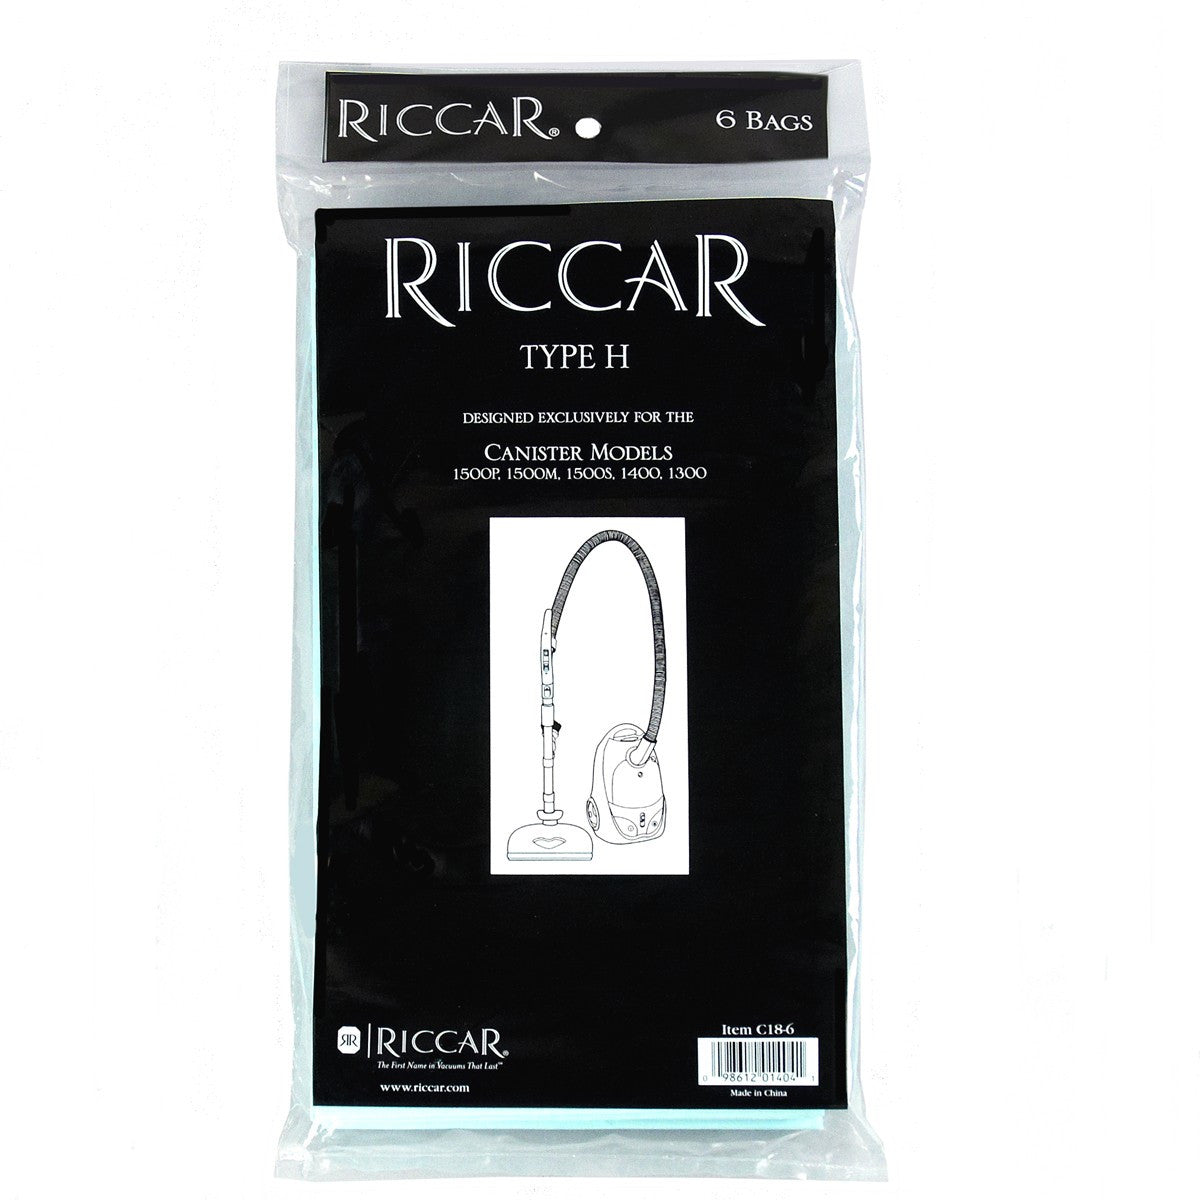 Genuine Riccar Type H paper bags for canisters 1500P,1500M,1500S,1400, & 1300 # C18-6